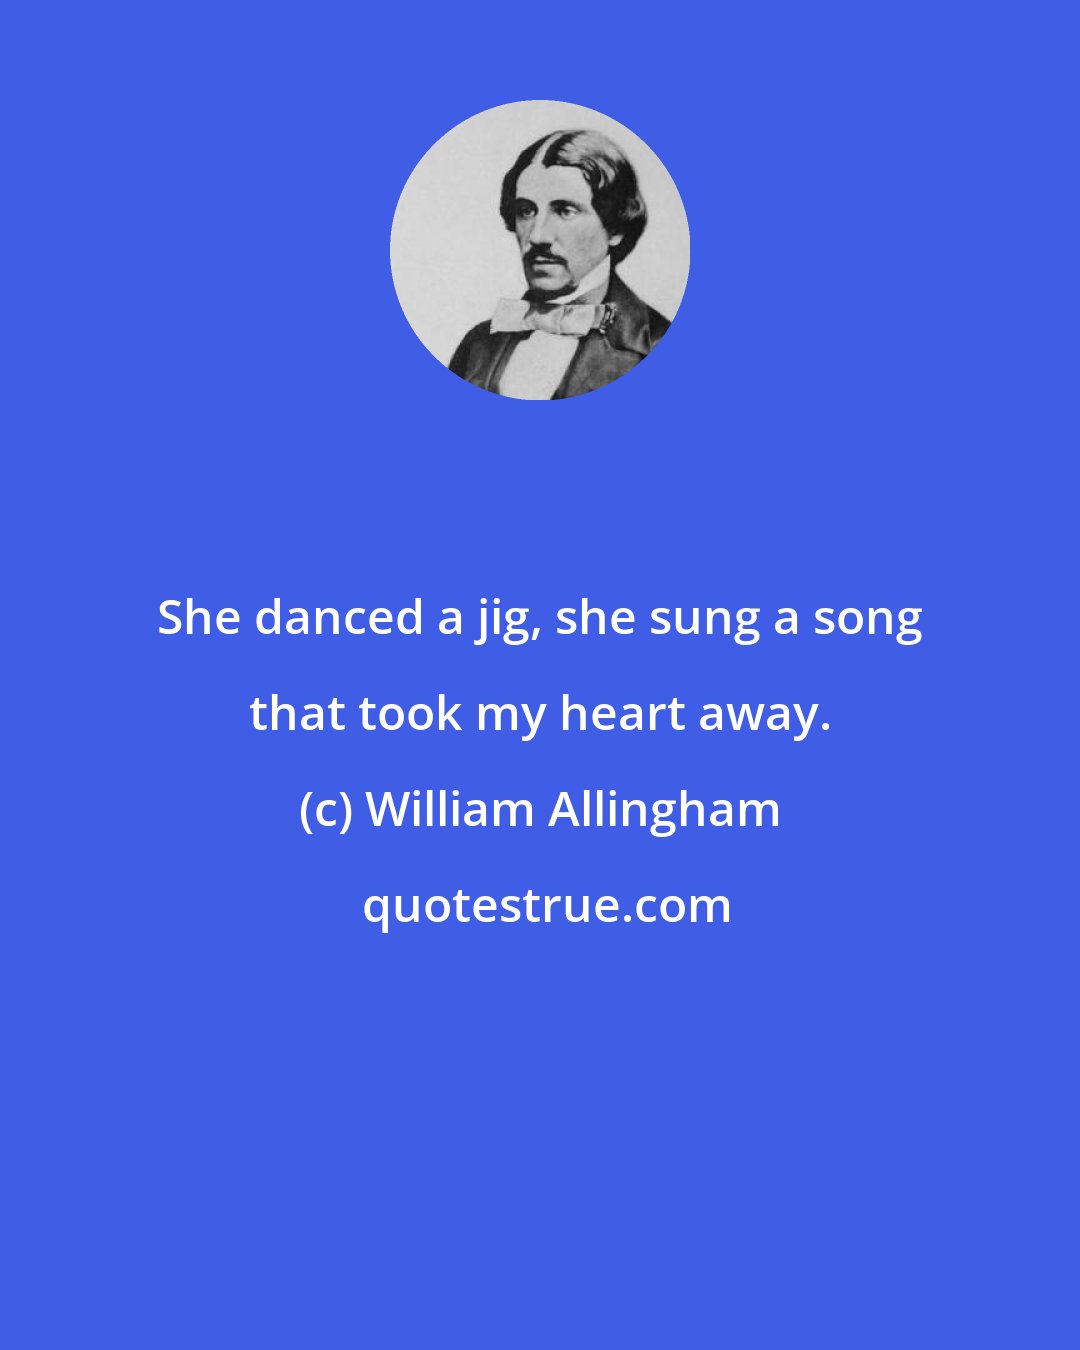 William Allingham: She danced a jig, she sung a song that took my heart away.